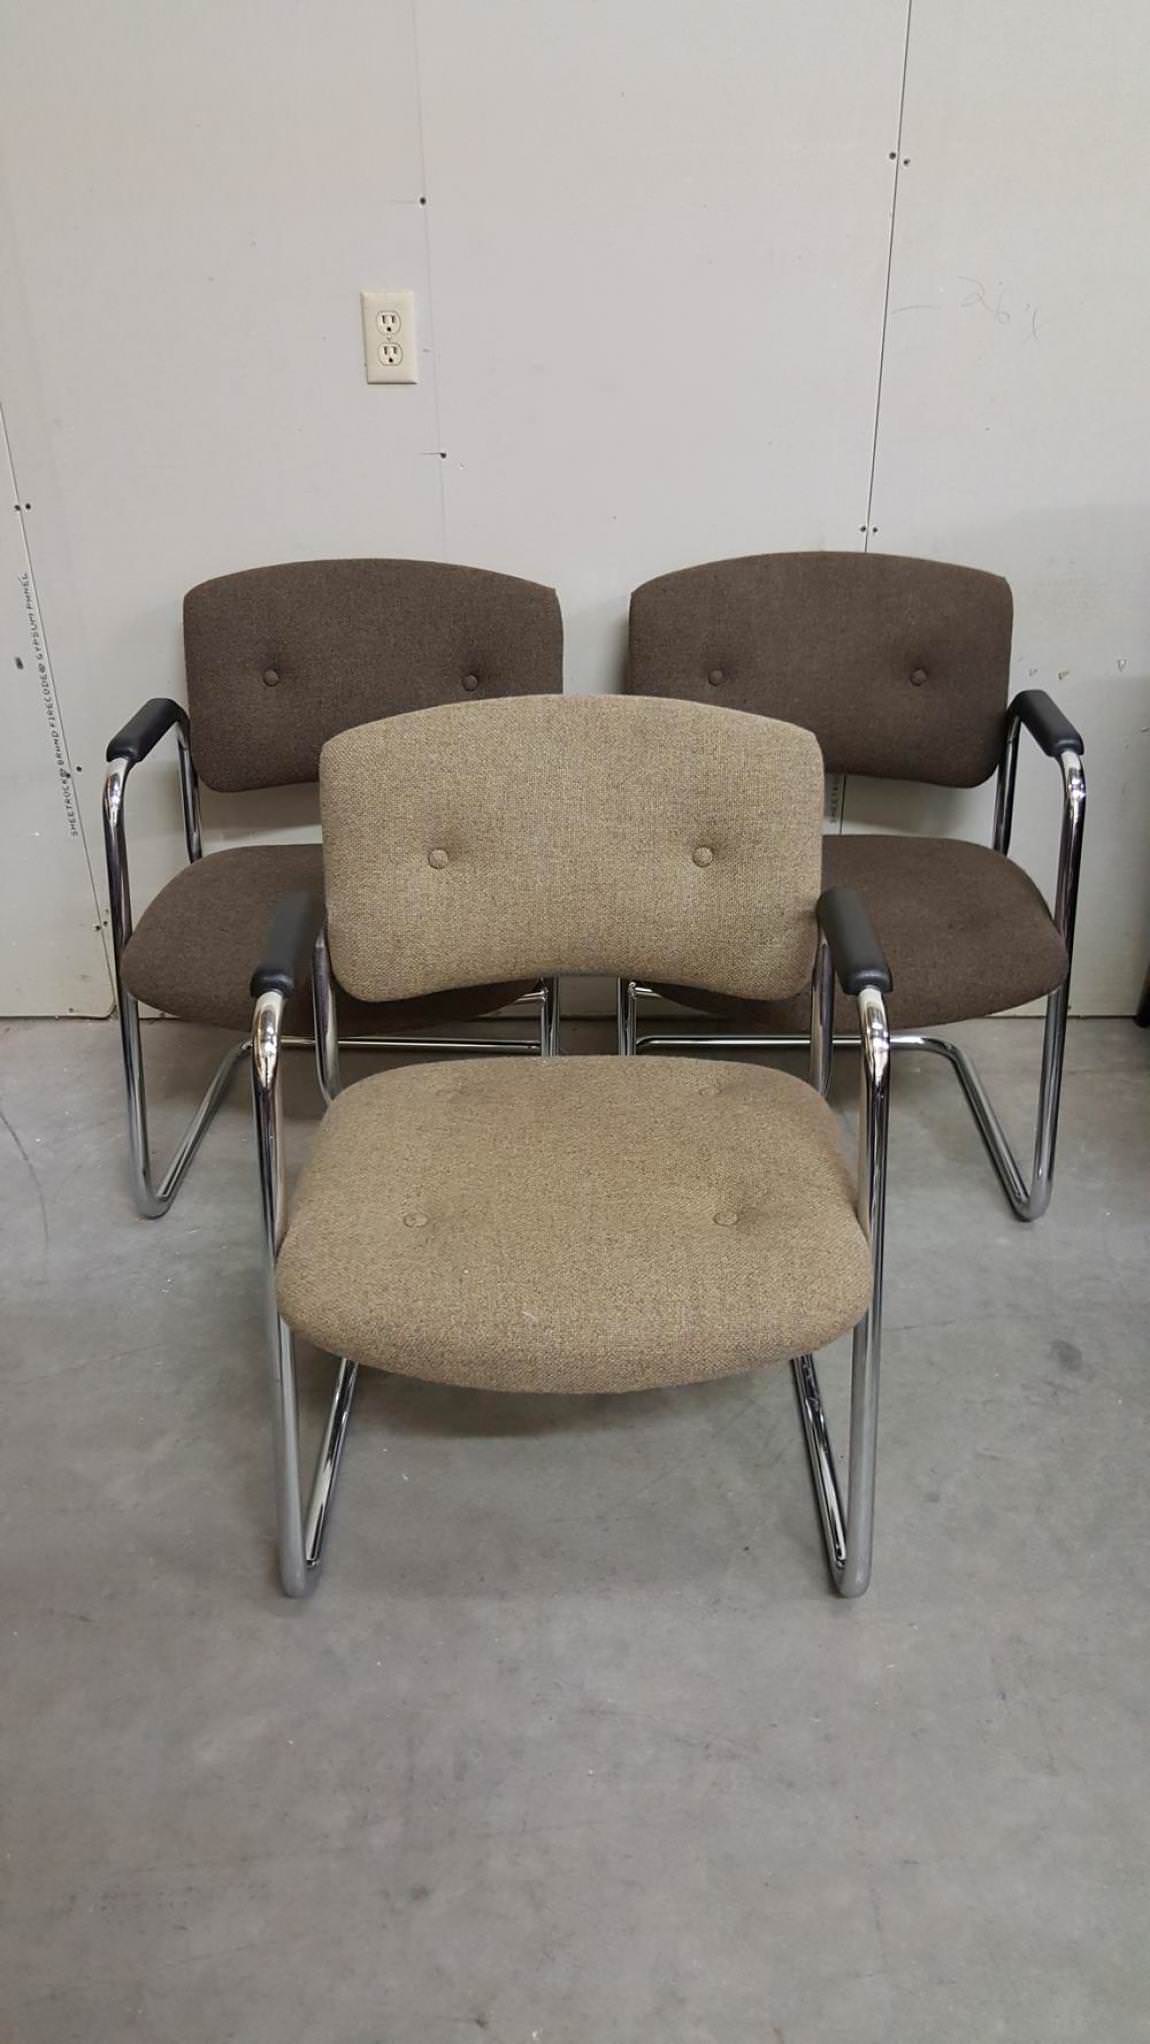 Tufted Brown and Chrome Office Guest Chairs